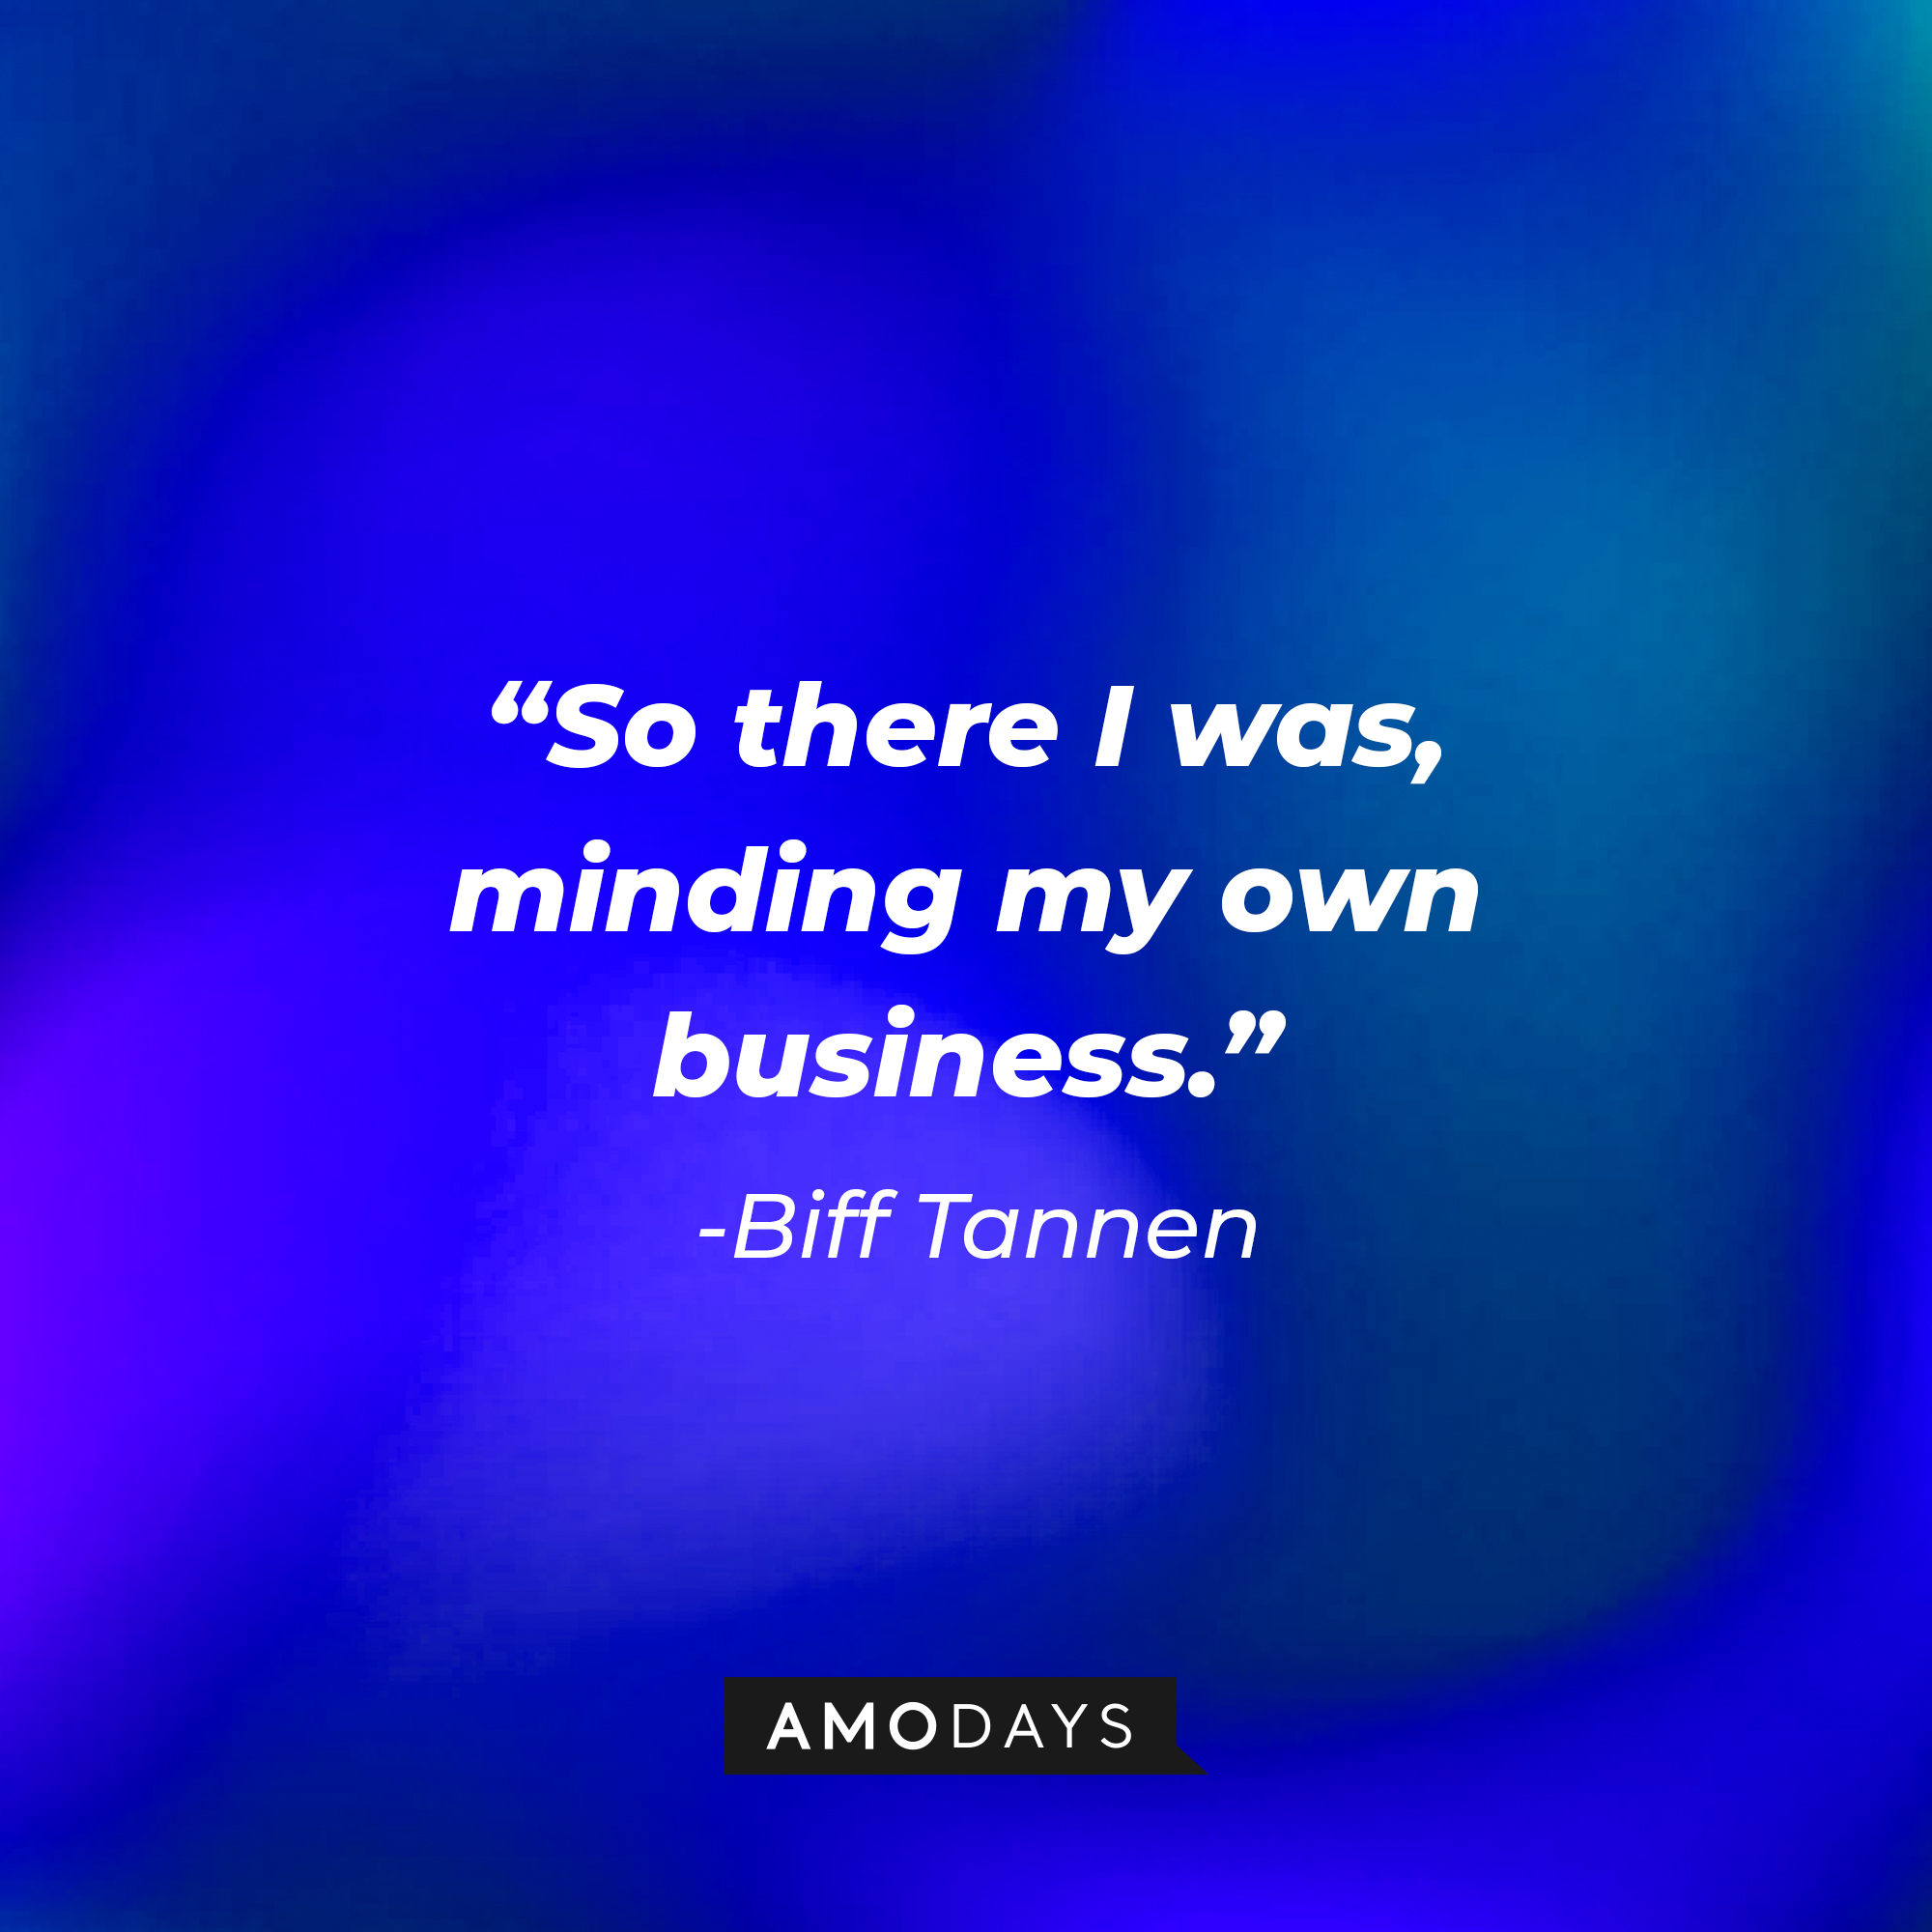 Biff Tannen’s quote: “So there I was, minding my own business.” | Source: AmoDays